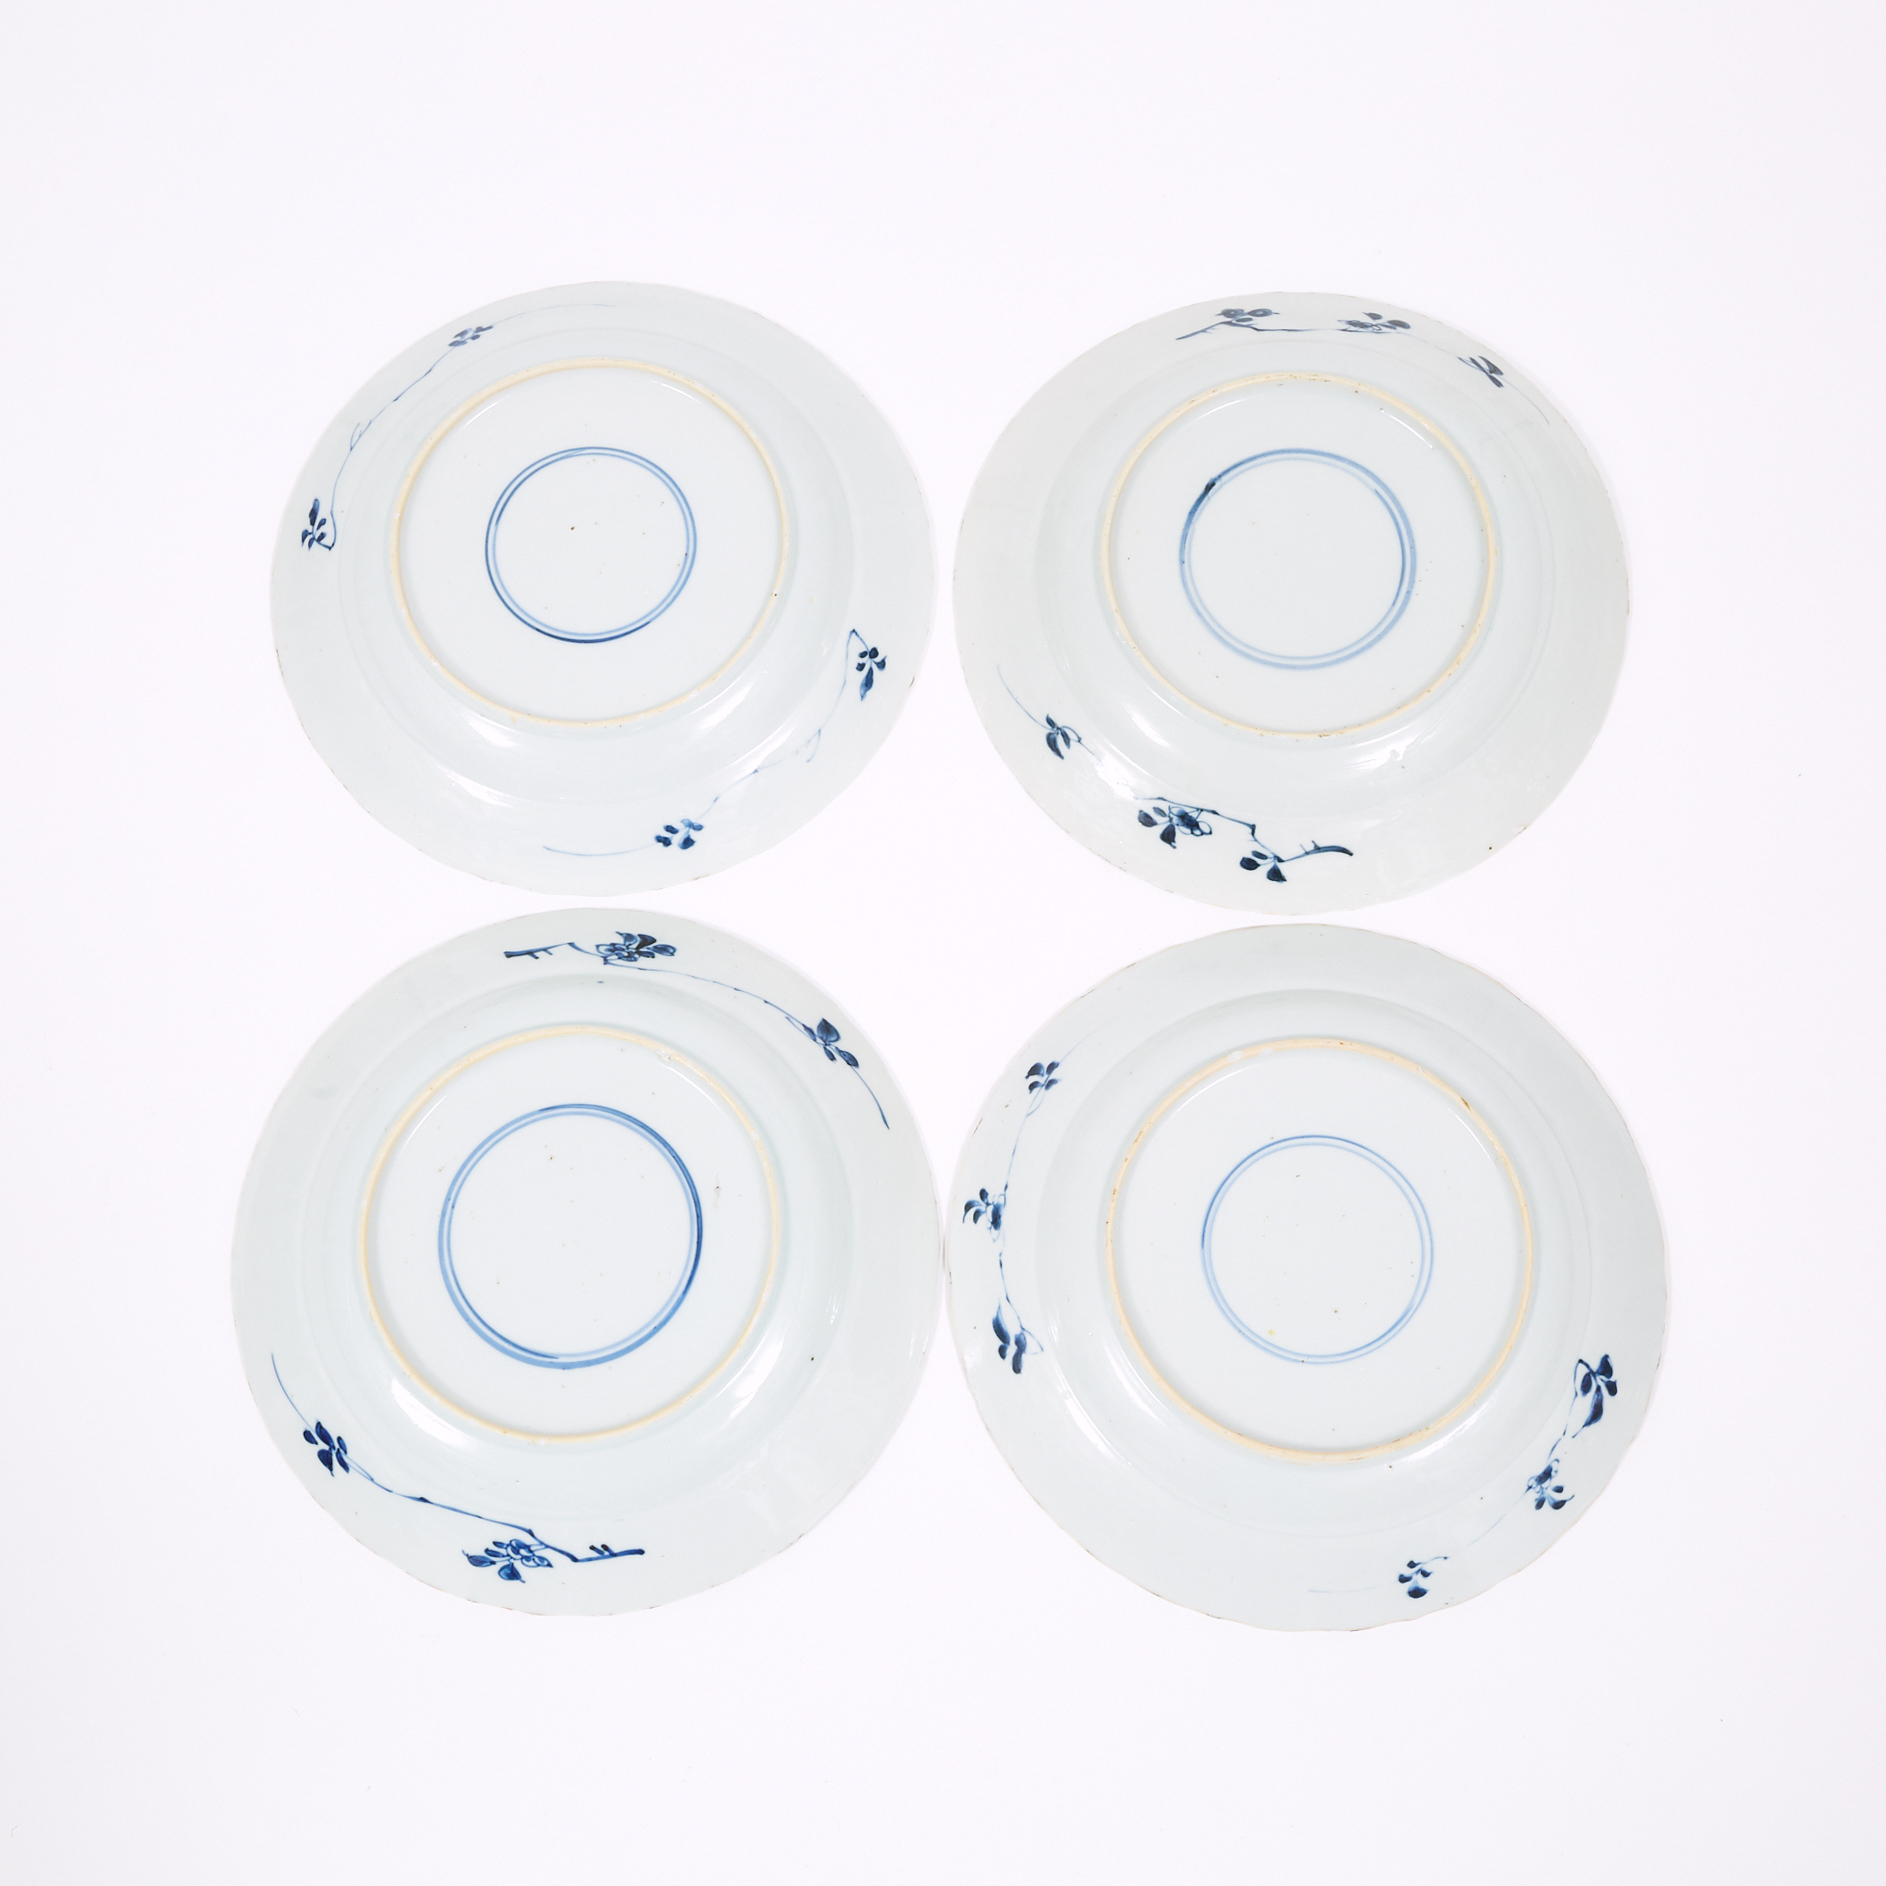 A Set of Four Blue and White Dishes with Floral Panels, 18th Century